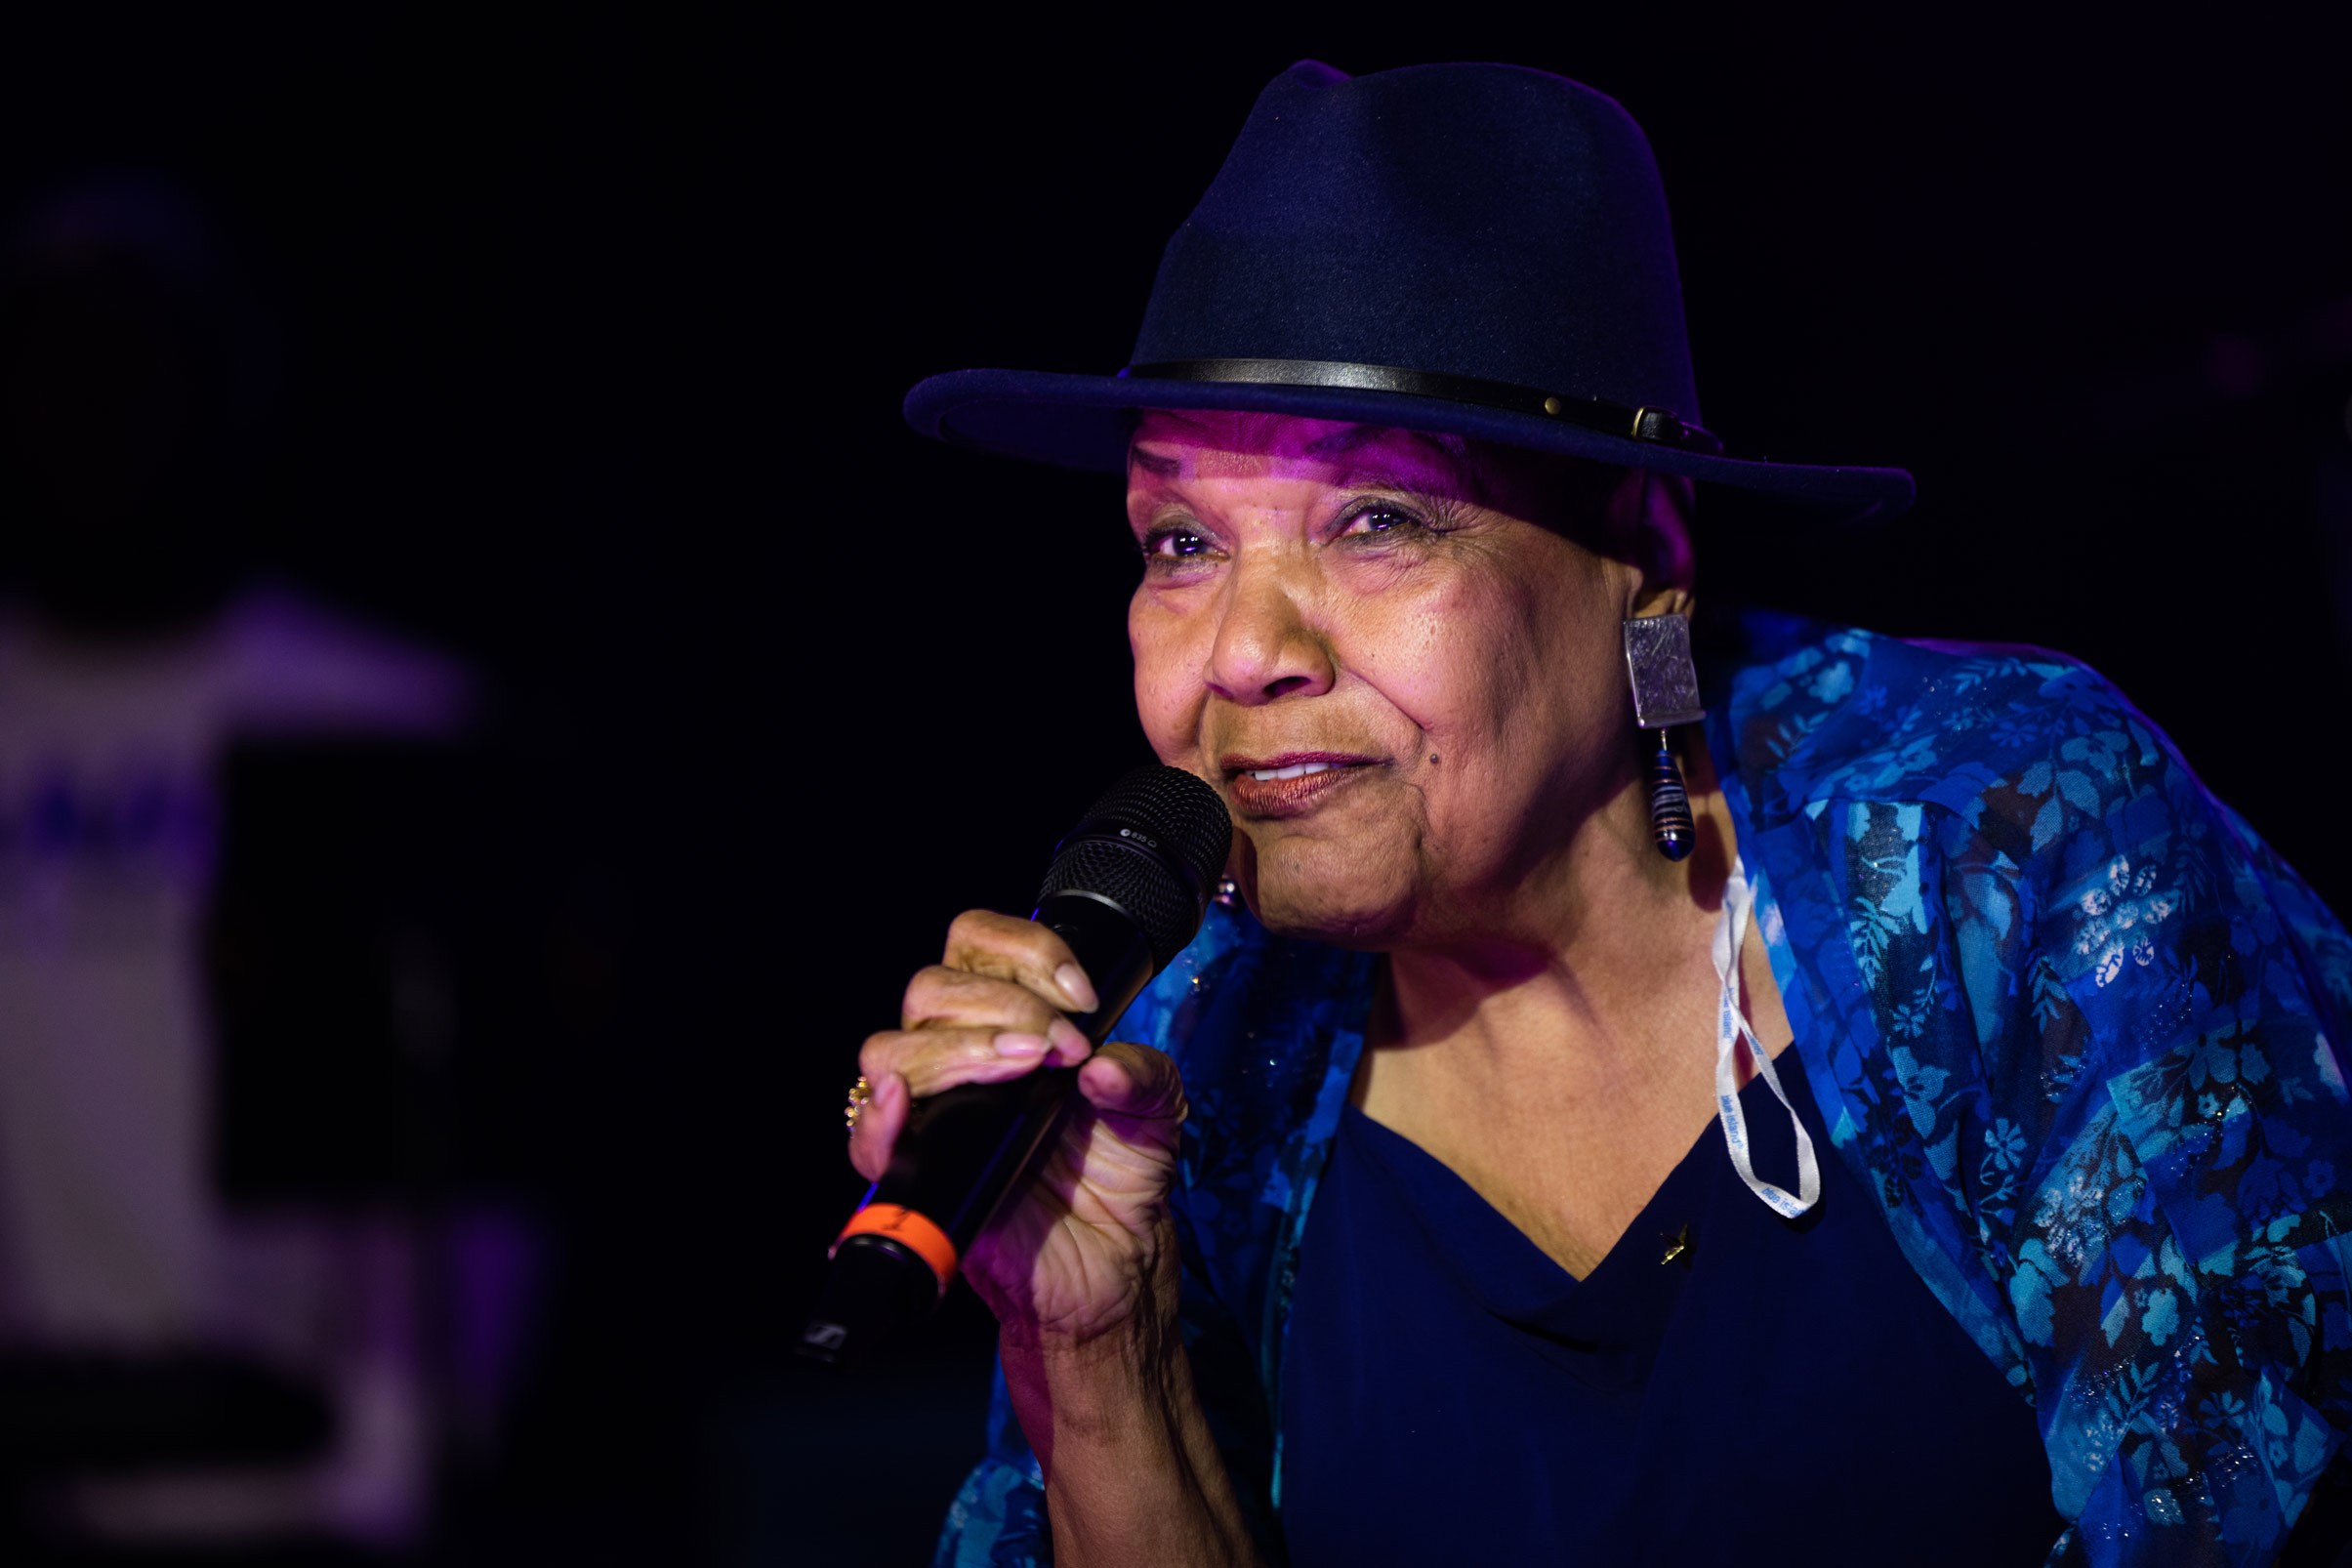 ‘Keep a cool booty’: Family and friends remember Houston jazz and blues singer Jewel Brown